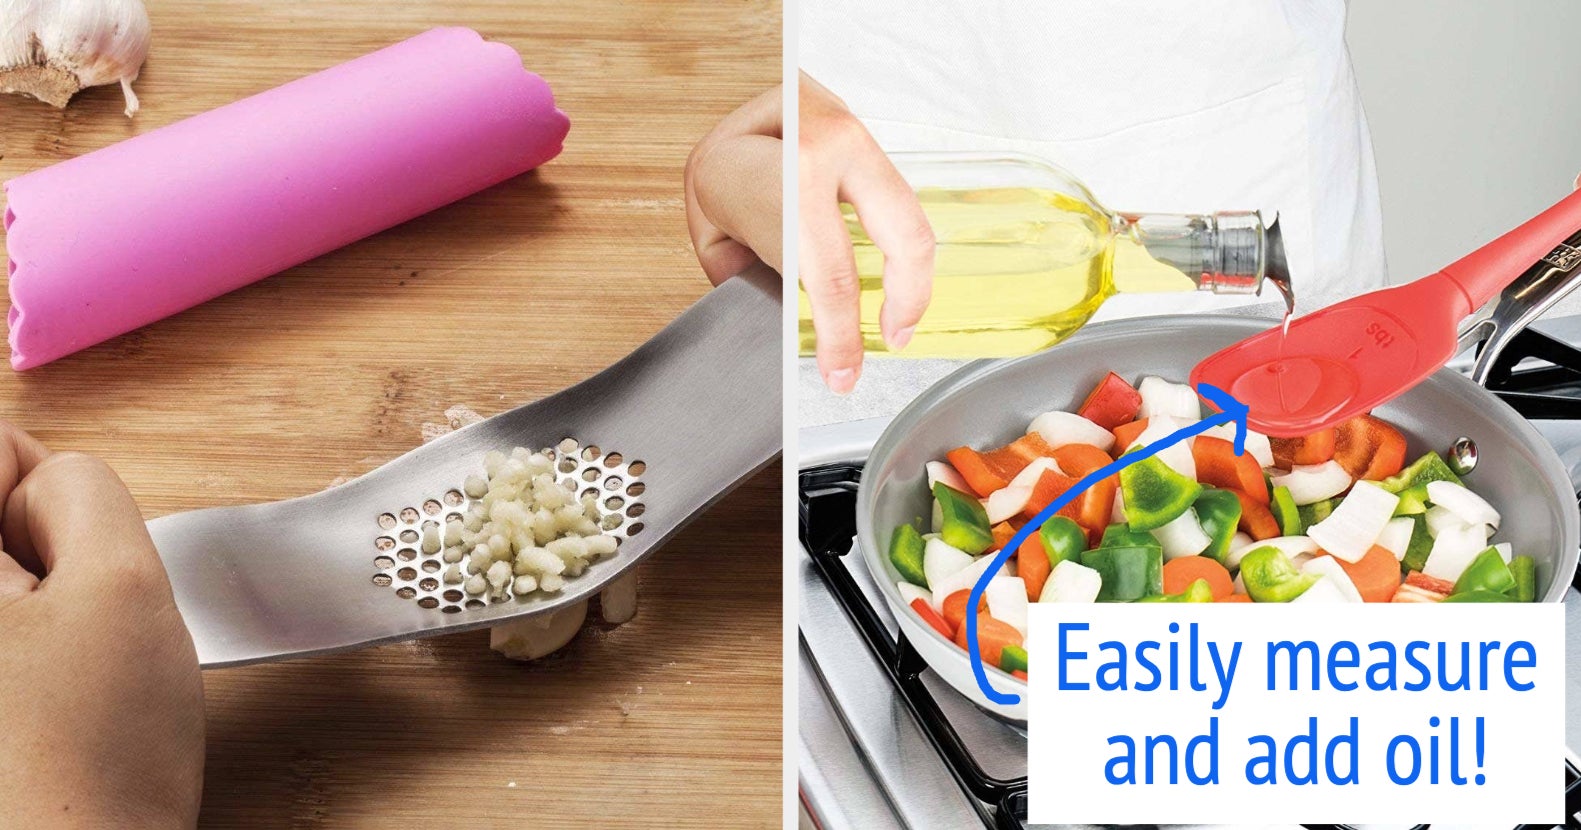 38 Must-Have Kitchen Gadgets To Make Cooking Easier